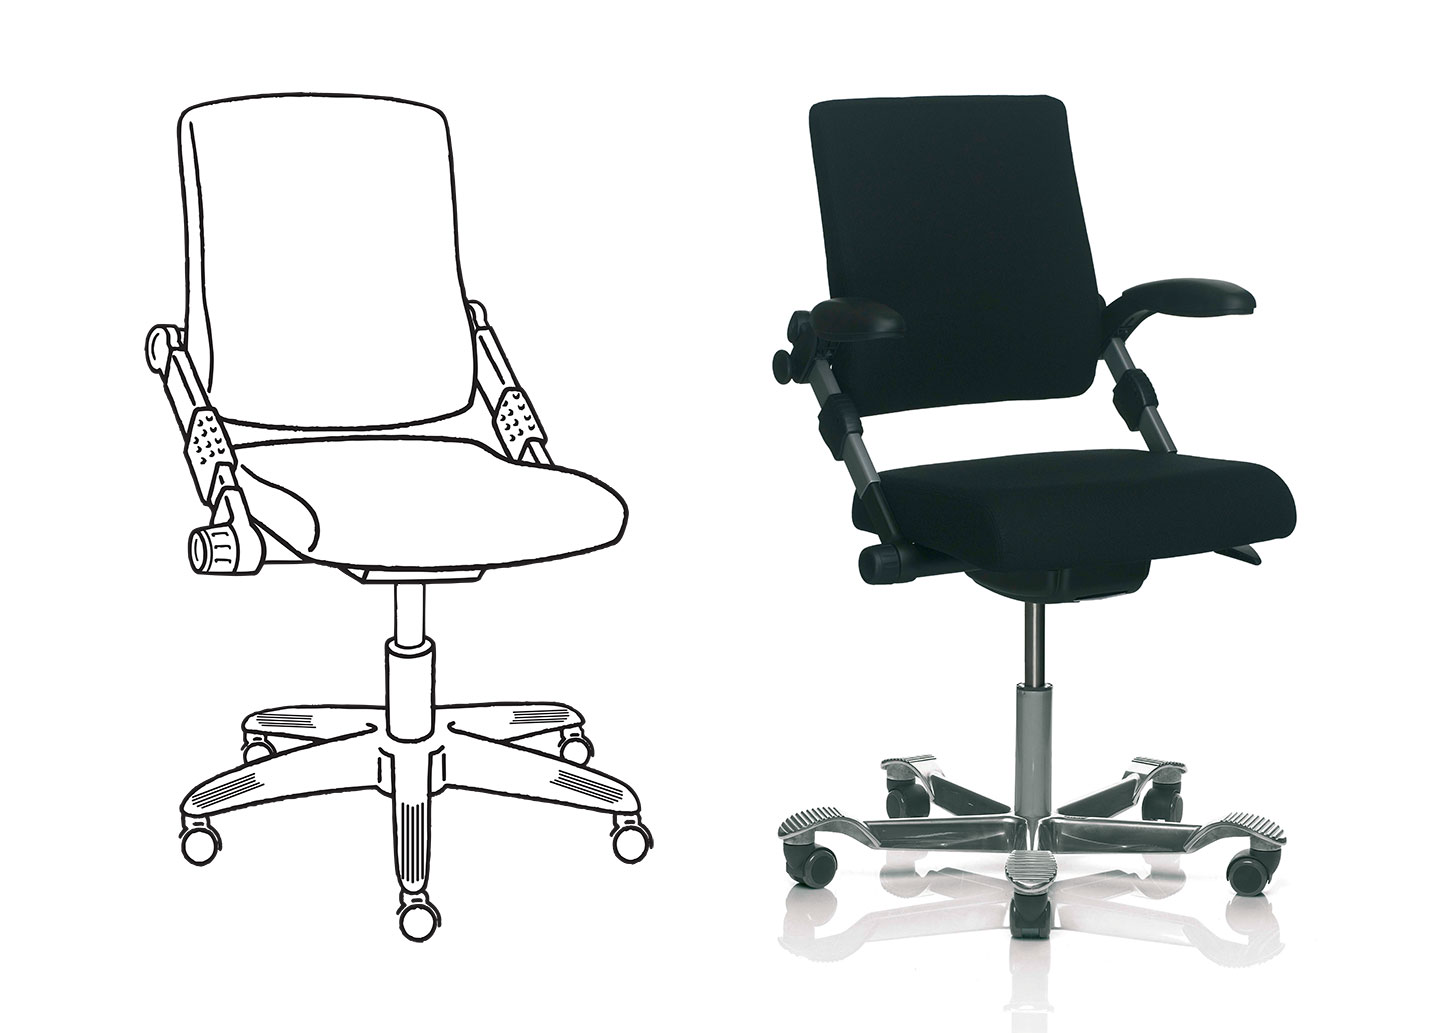 HÅG H03 350, showing line drawing and final chair